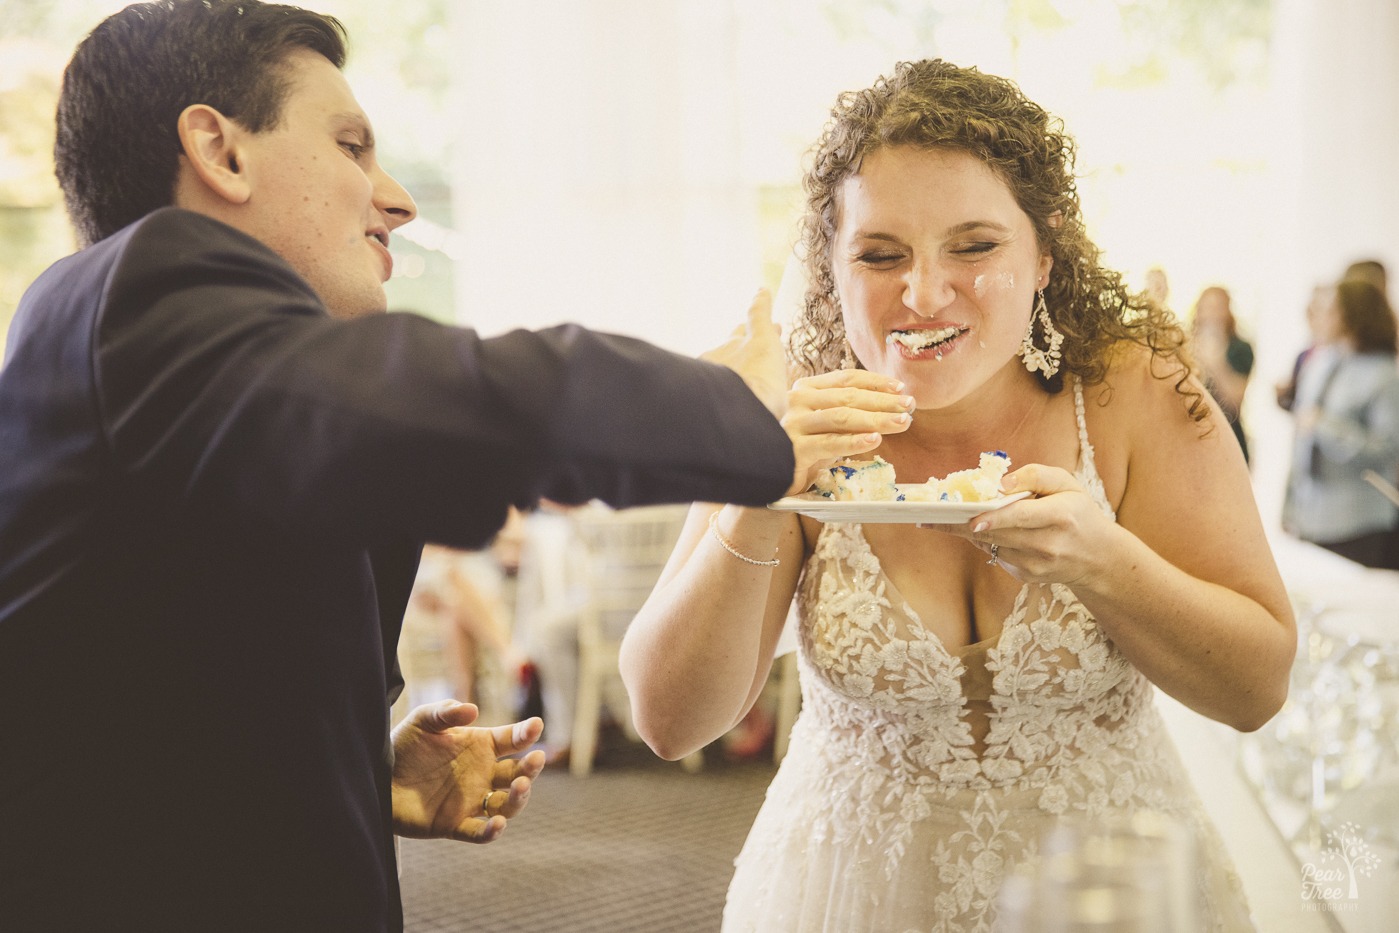 Laughing bride after her groom has shoved cake into her mouth and made a mess of her face at their Atlanta wedding